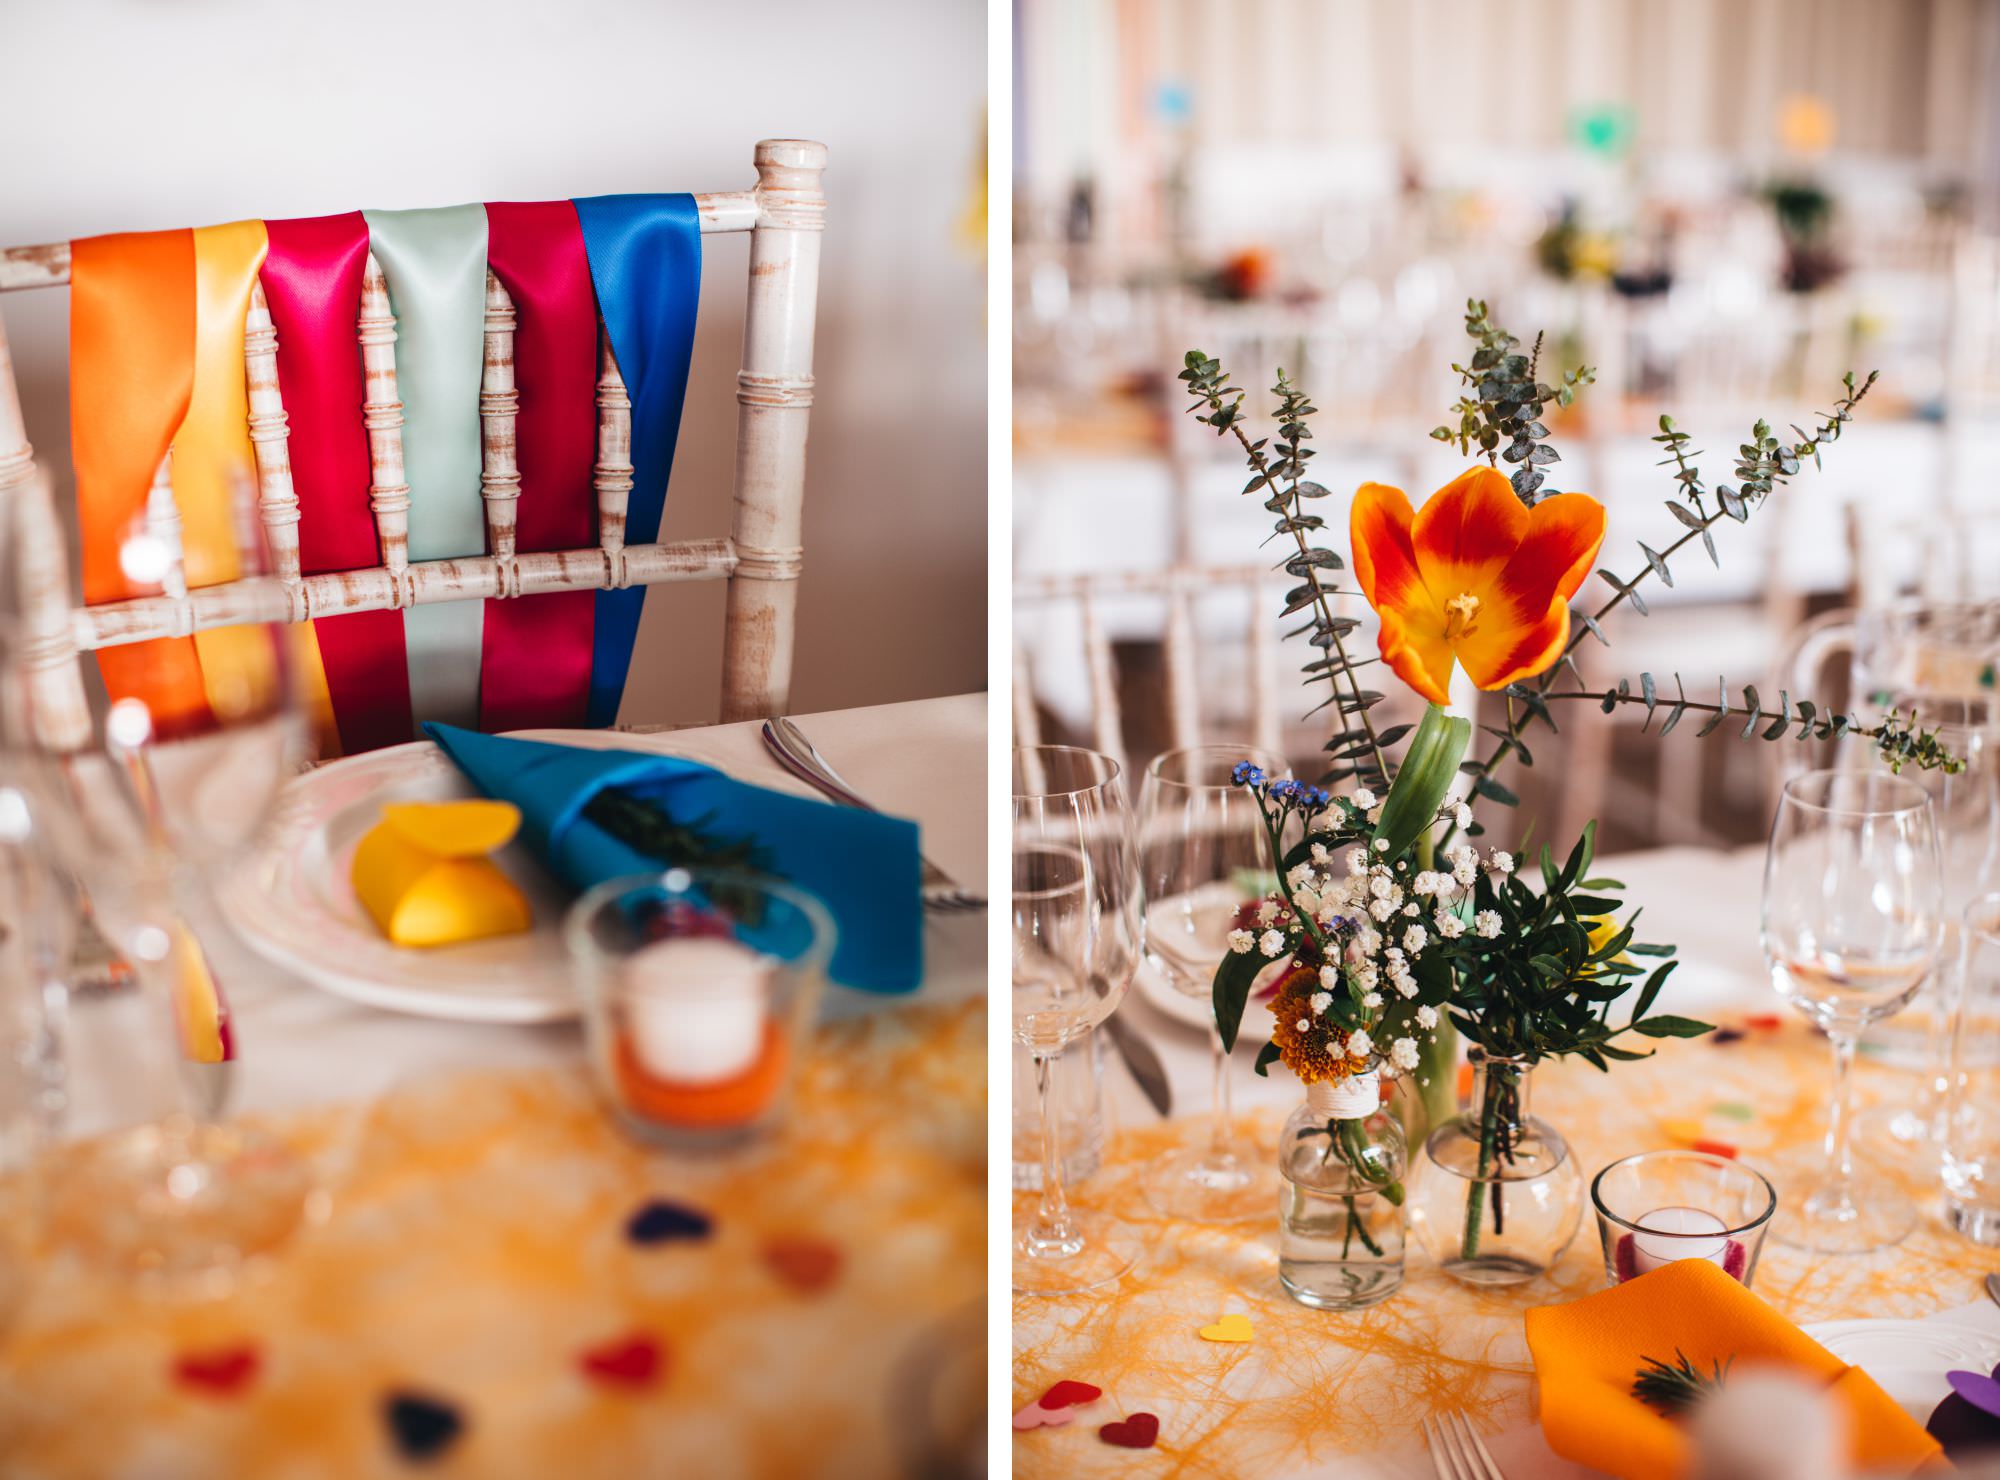 ribbons and flowers on trestle tables